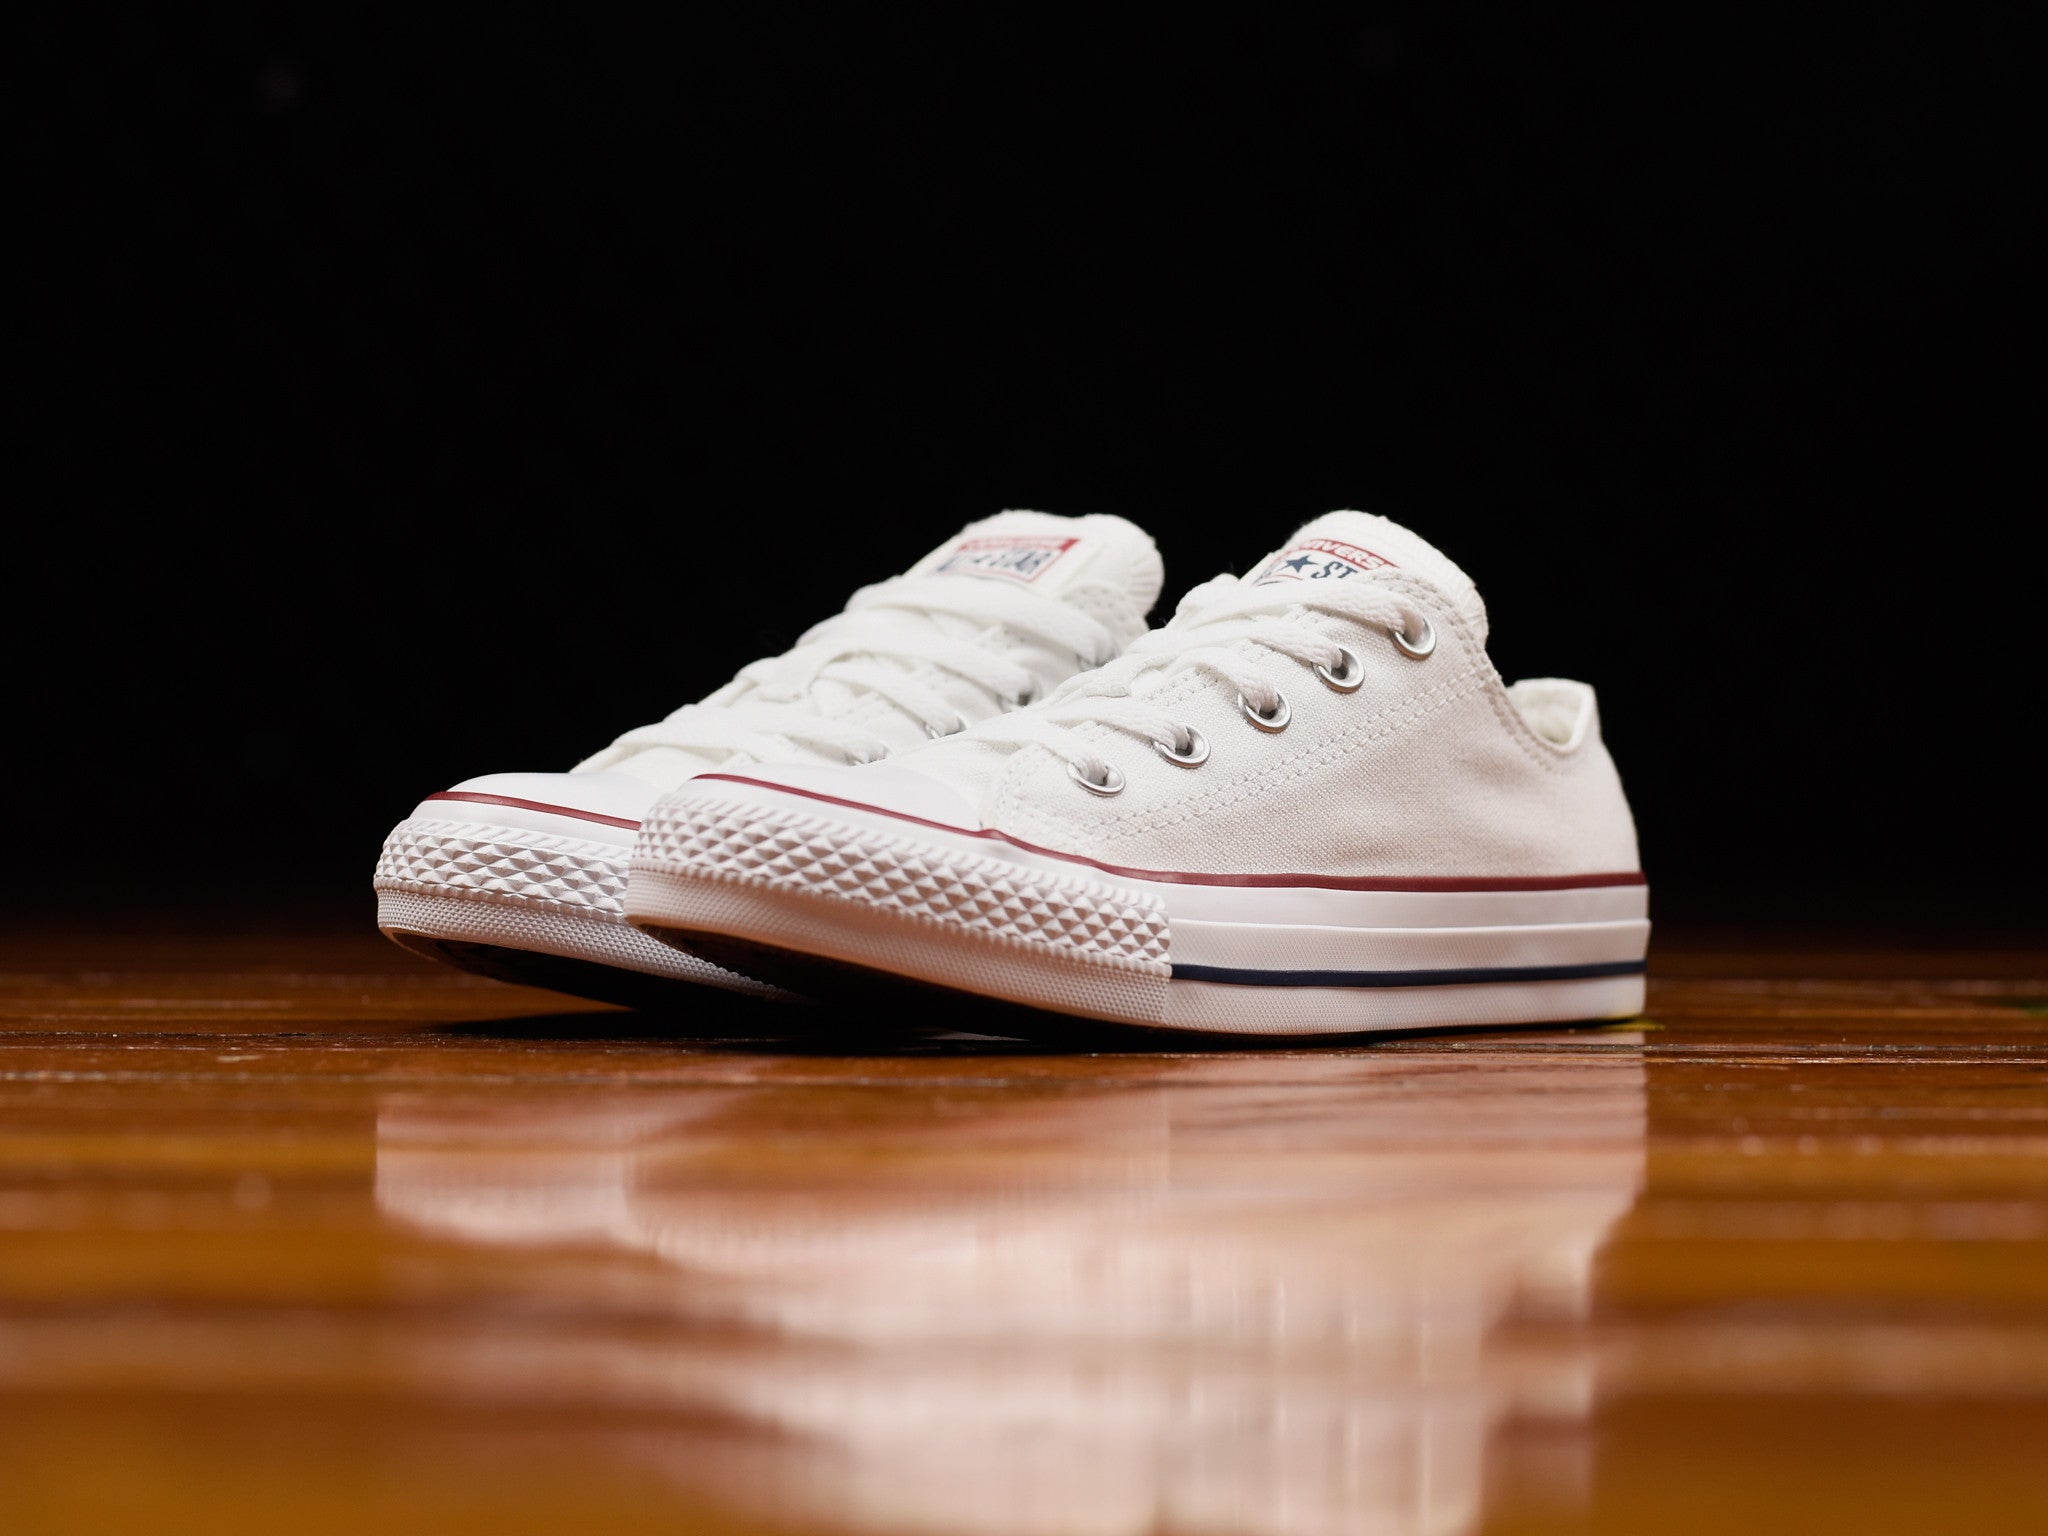 Men's Converse All Star White Low [M7652]